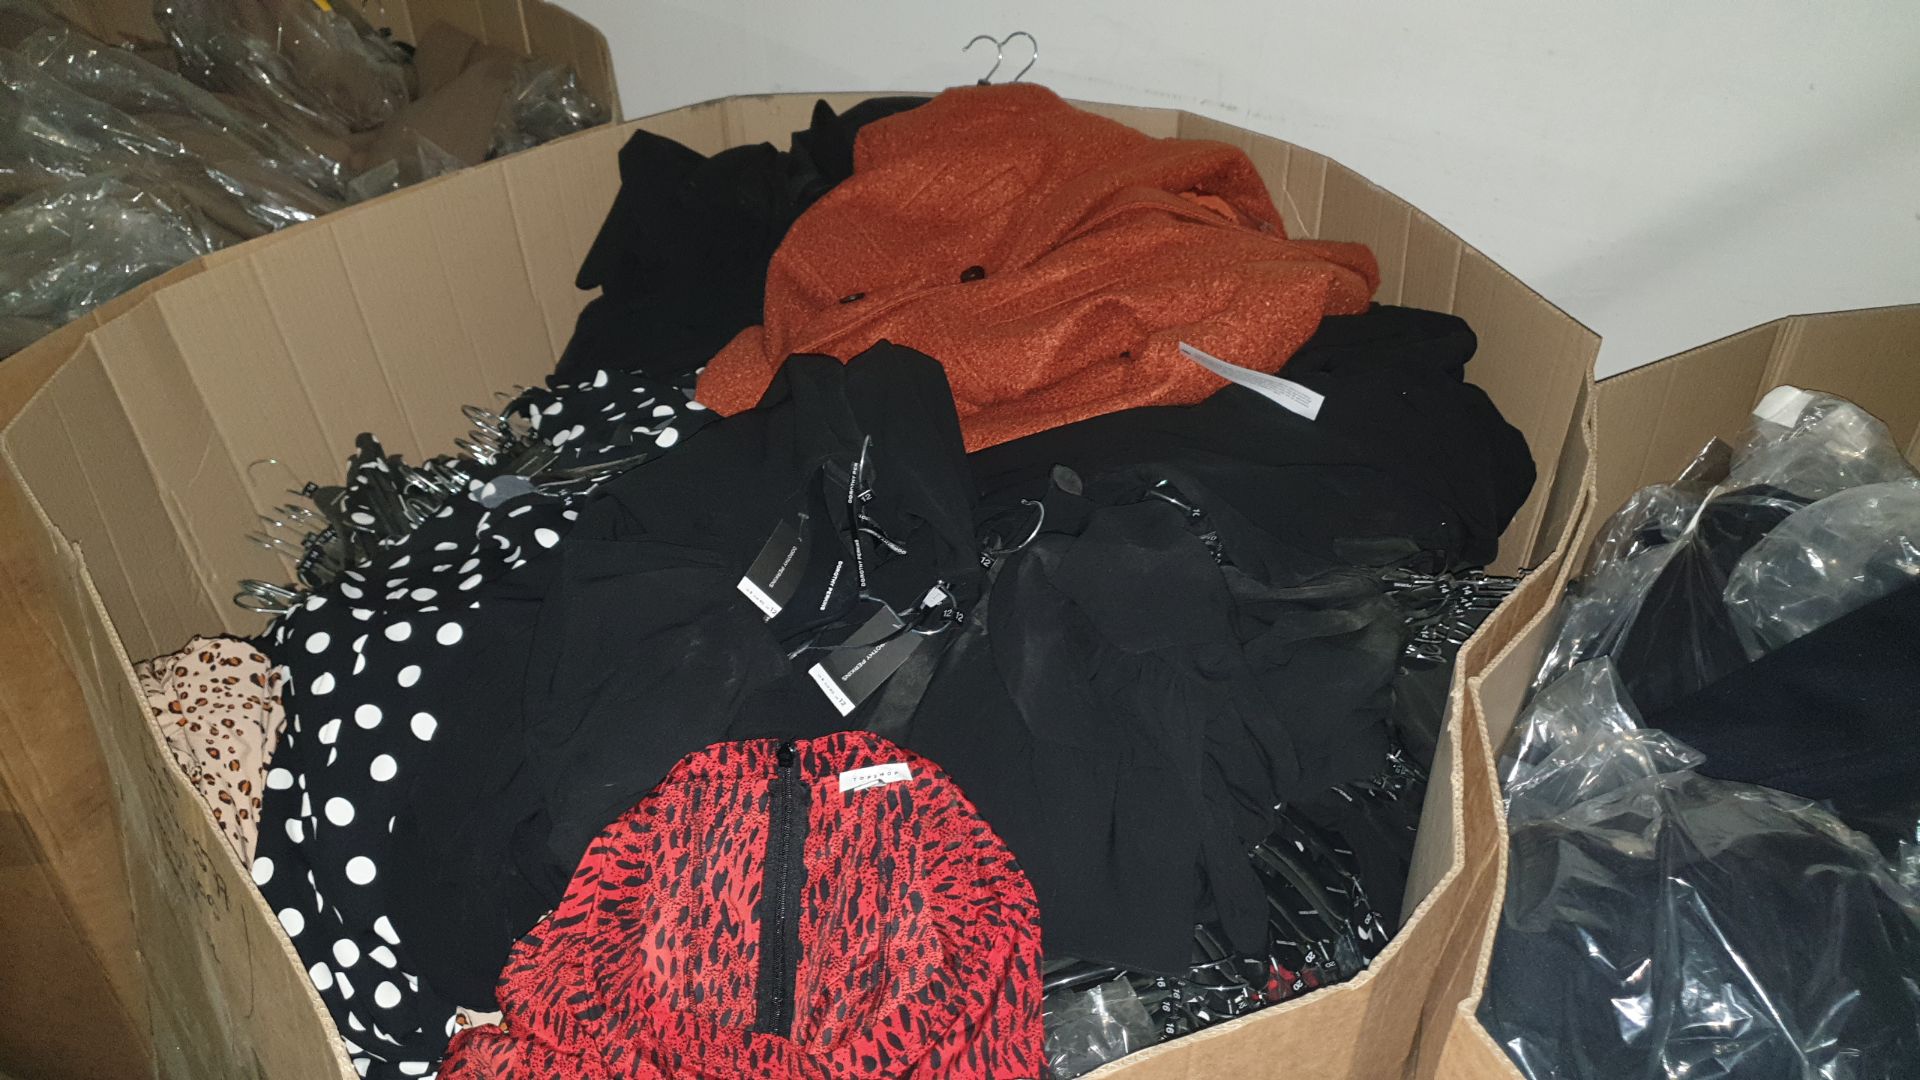 FULL PALLET CONTAINING LARGE AMOUNT OF BRAND NEW CLOTHING I.E TOPSHOP COATS, TOPSHOP DRESSES VARIOUS